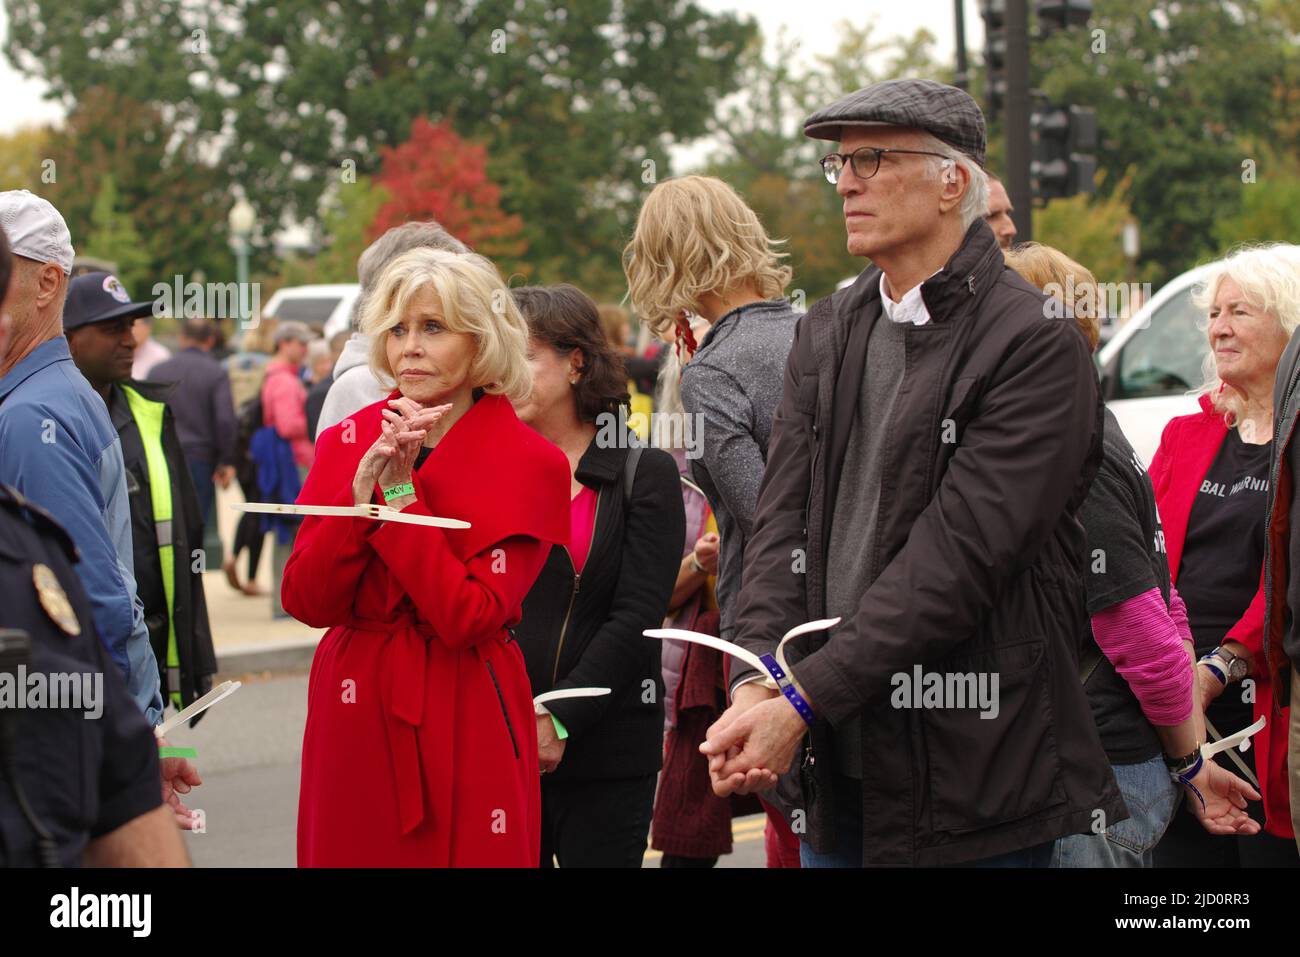 Actors Jane Fonda and Ted Danson get arrested outside the US Capitol as part of a climate change protest on 25 October 2019. Stock Photo